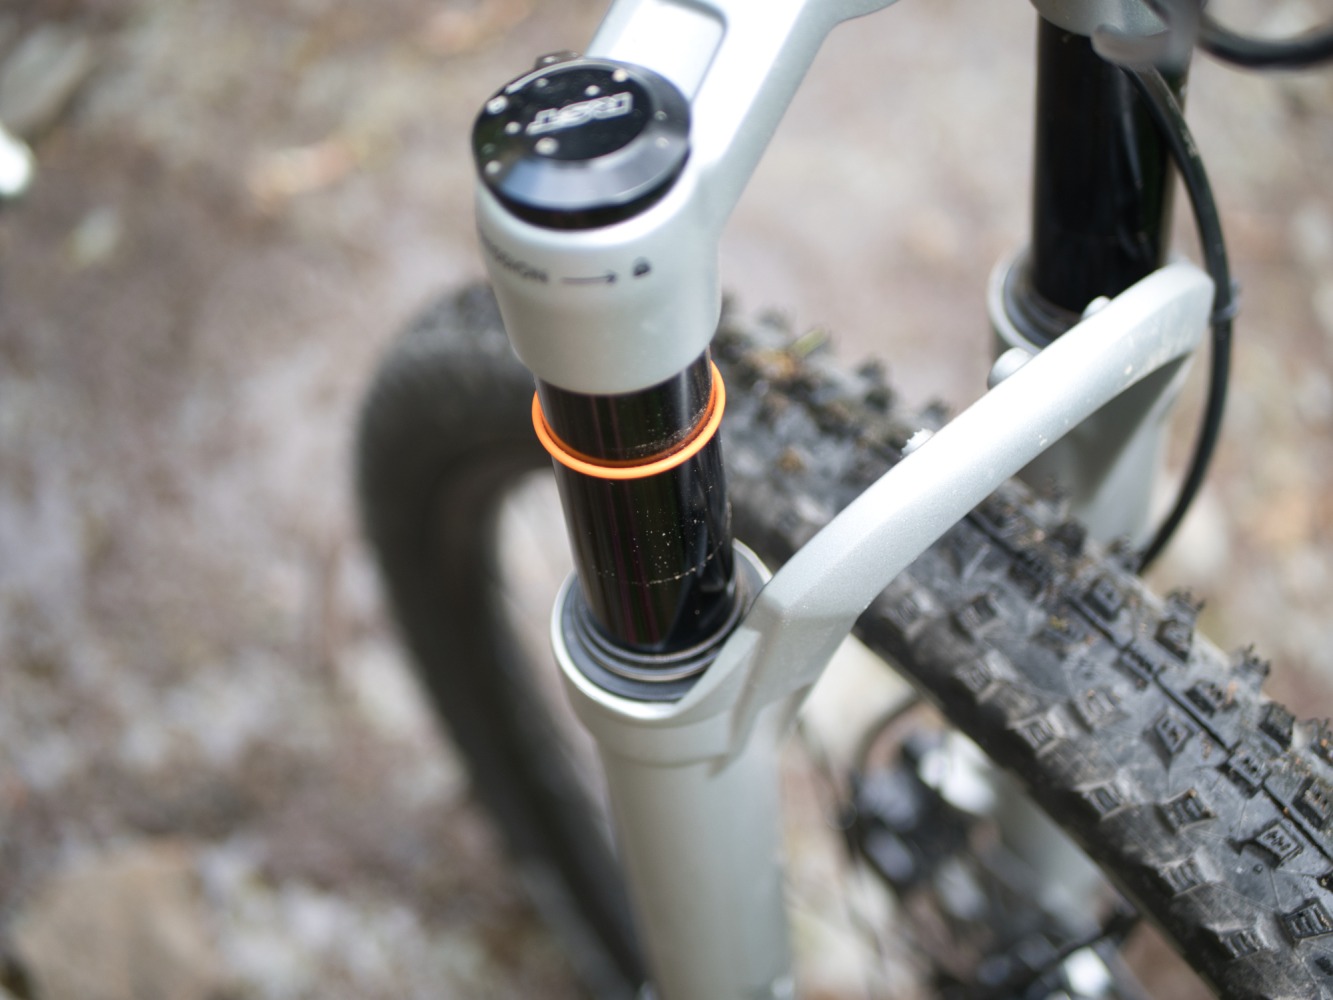 woom OFF AIR 5 review: close up of the woom OFF AIR 5 mountain bike suspension fork trunnions 